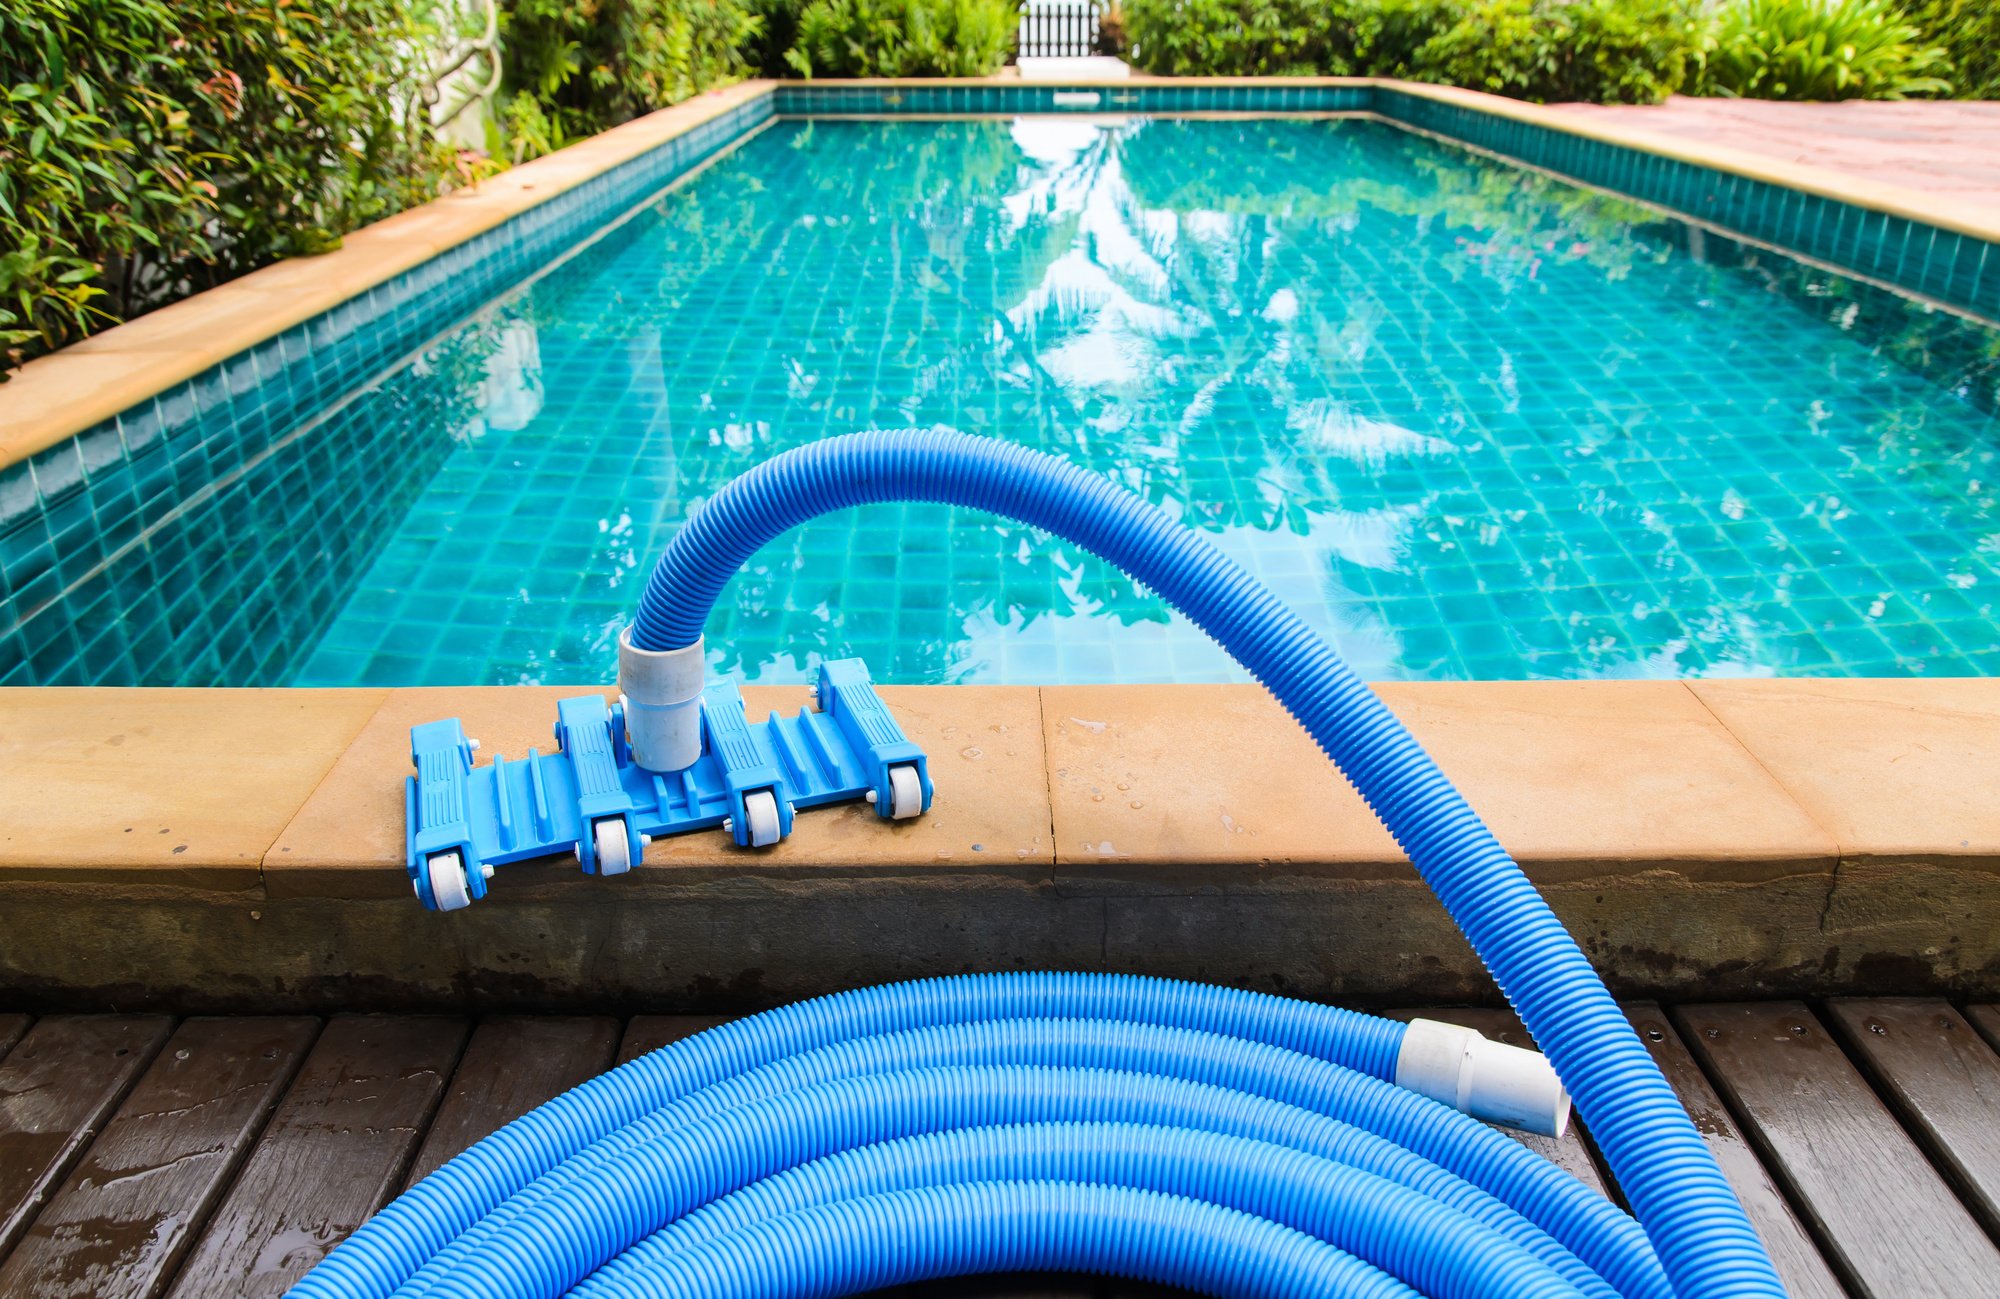 Having a swimming pool means keeping it properly maintained. Learn about common problems that need swimming pool repairs here.